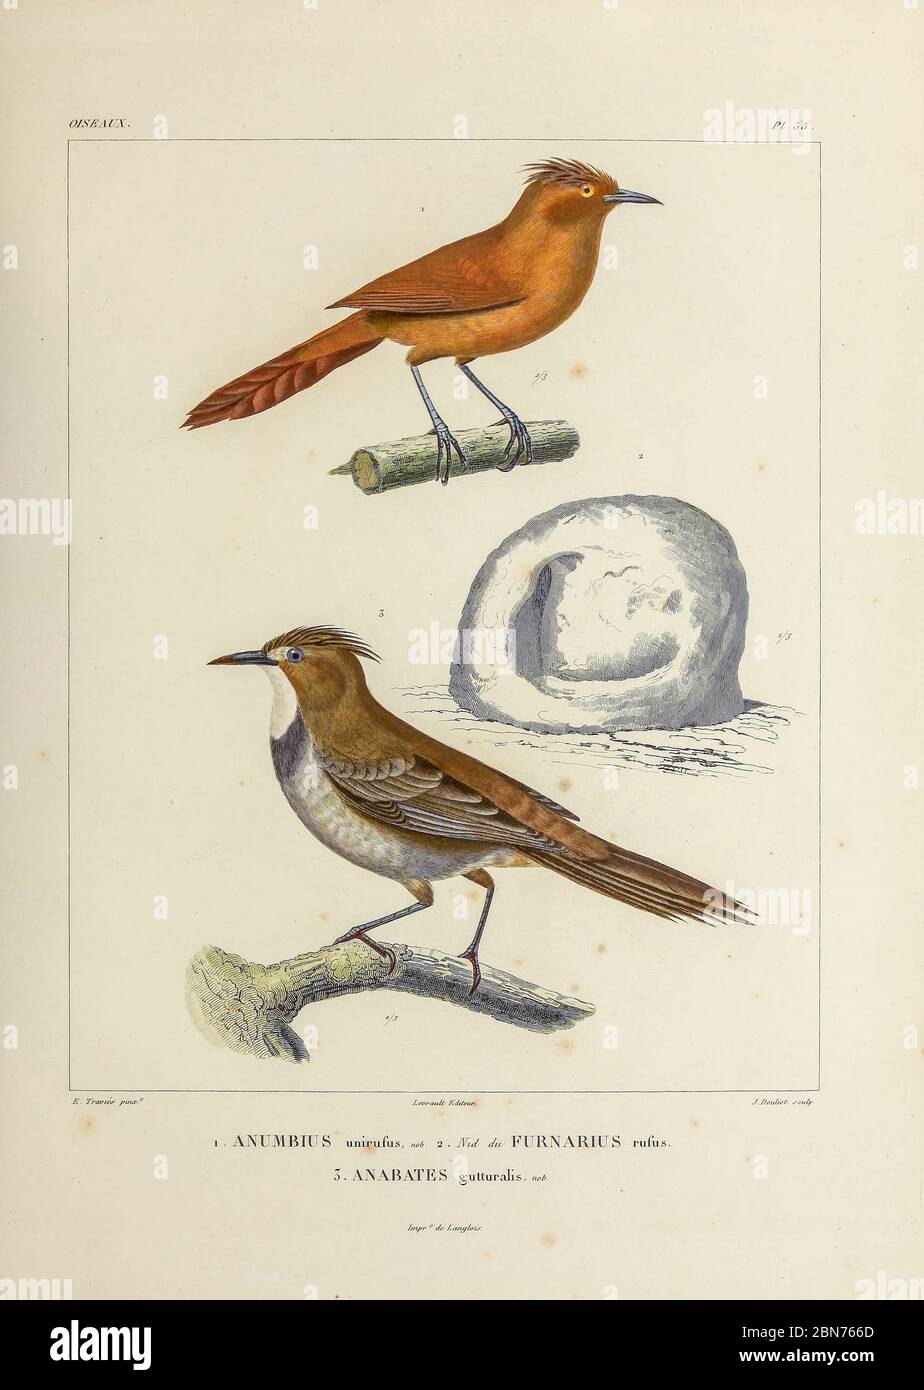 hand coloured sketch Top: grey-crested cacholote (Pseudoseisura unirufa [Here as Anumbius unirufus]) Bottom: white-throated cacholote (Pseudoseisura gutturalis [Here as Anabates guttralis]) From the book 'Voyage dans l'Amérique Méridionale' [Journey to South America: (Brazil, the eastern republic of Uruguay, the Argentine Republic, Patagonia, the republic of Chile, the republic of Bolivia, the republic of Peru), executed during the years 1826 - 1833] 4th volume Part 3 By: Orbigny, Alcide Dessalines d', d'Orbigny, 1802-1857; Montagne, Jean François Camille, 1784-1866; Martius, Karl Friedrich P Stock Photo